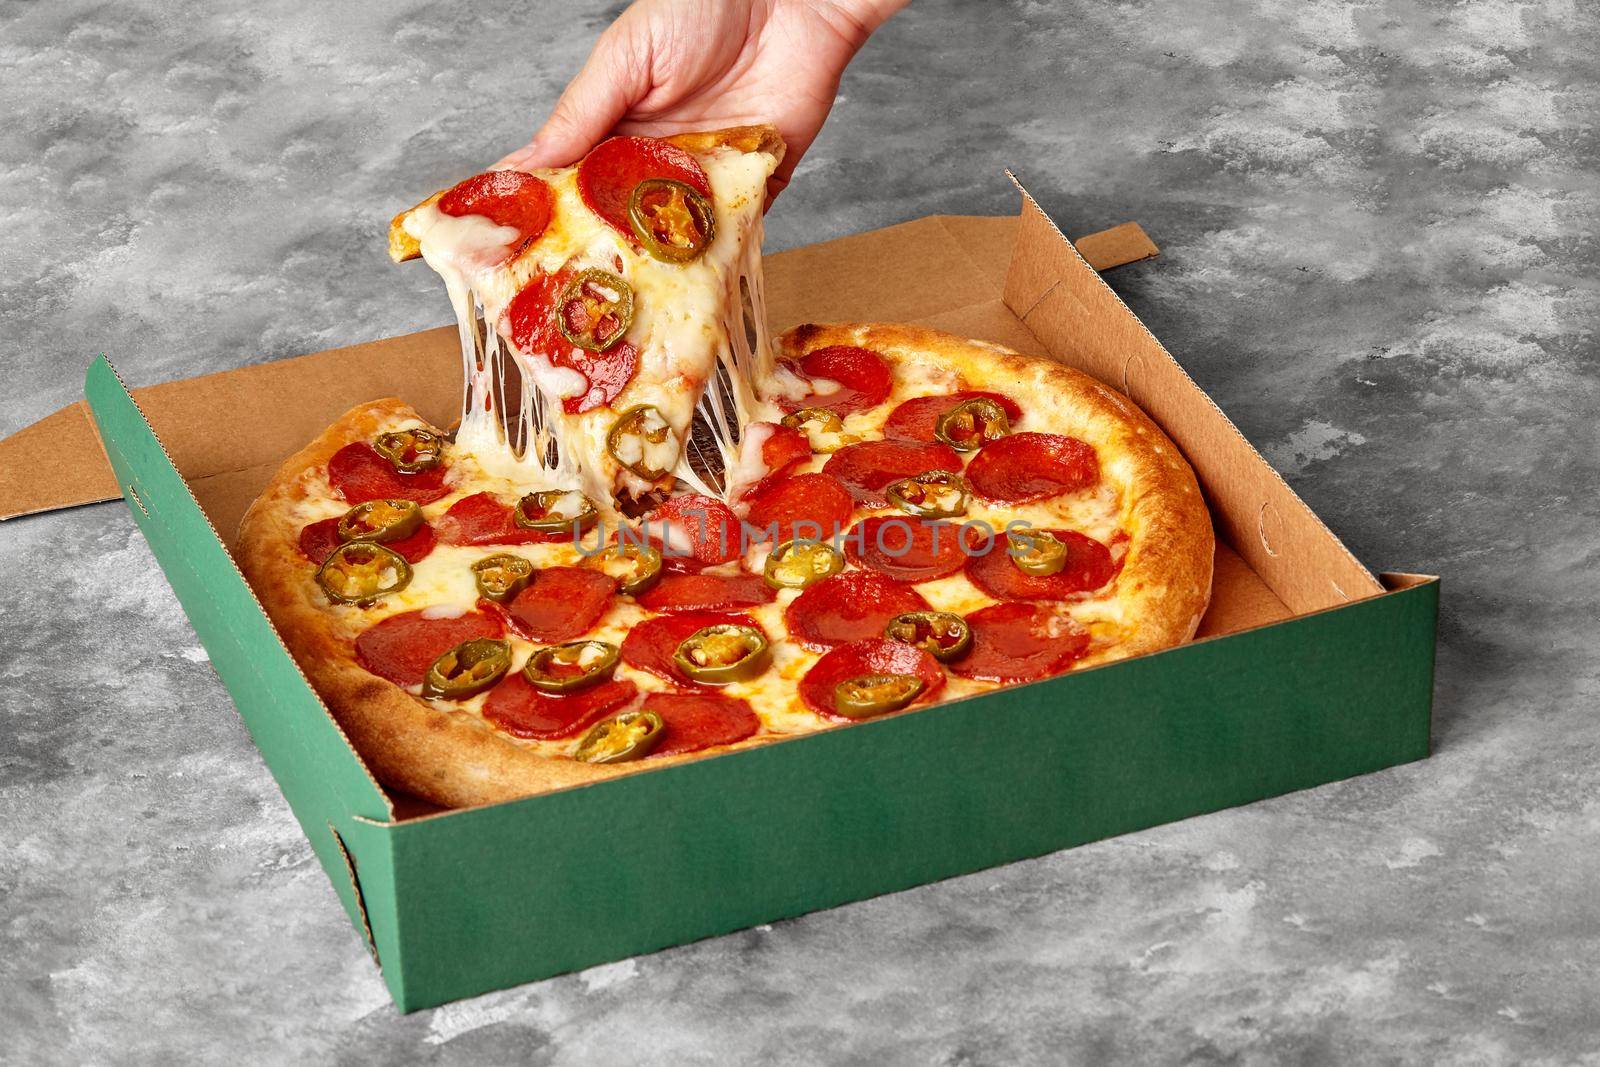 Woman taking slice of thin hot pizza with melted cheese, pepperoni and pieces of spicy jalapeno from cardboard box lying on gray stone table, cropped image. Takeaway food concept